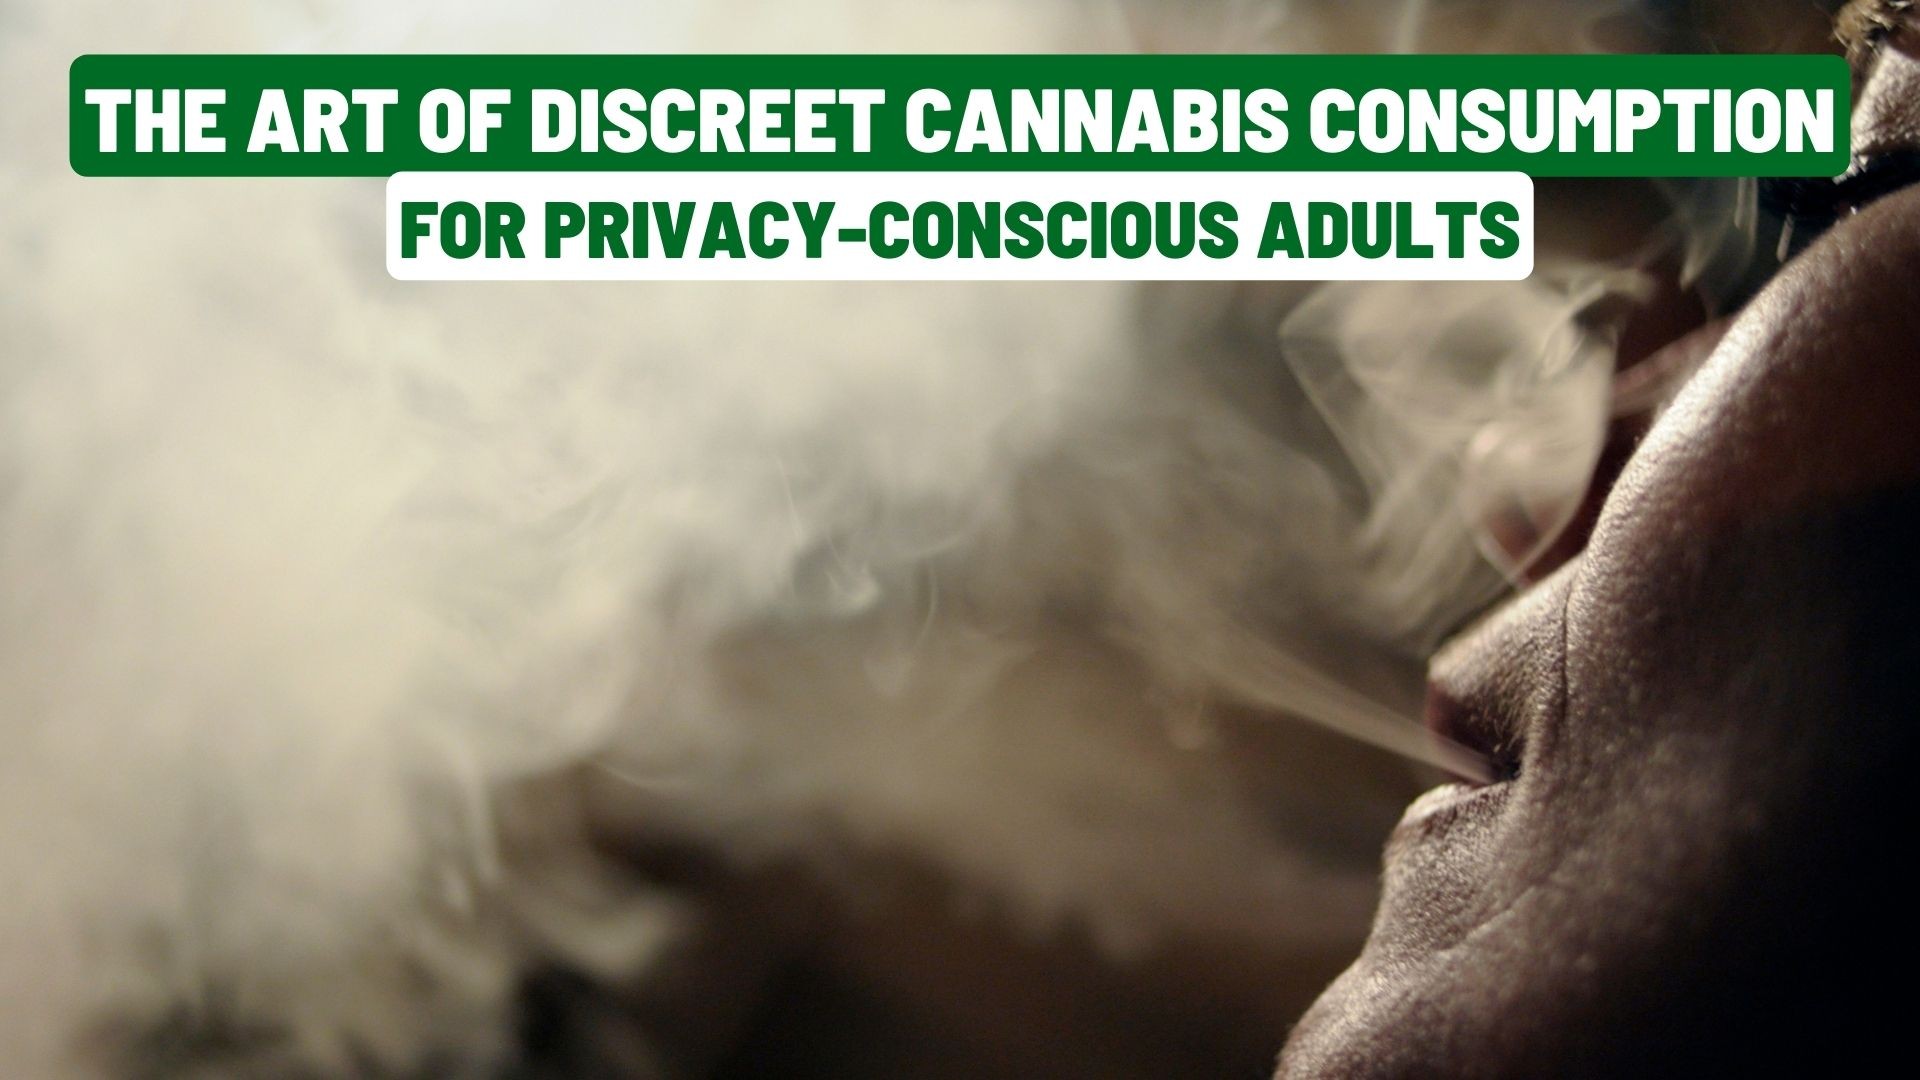 The Art of Discreet Cannabis Consumption for Privacy-Conscious Adults